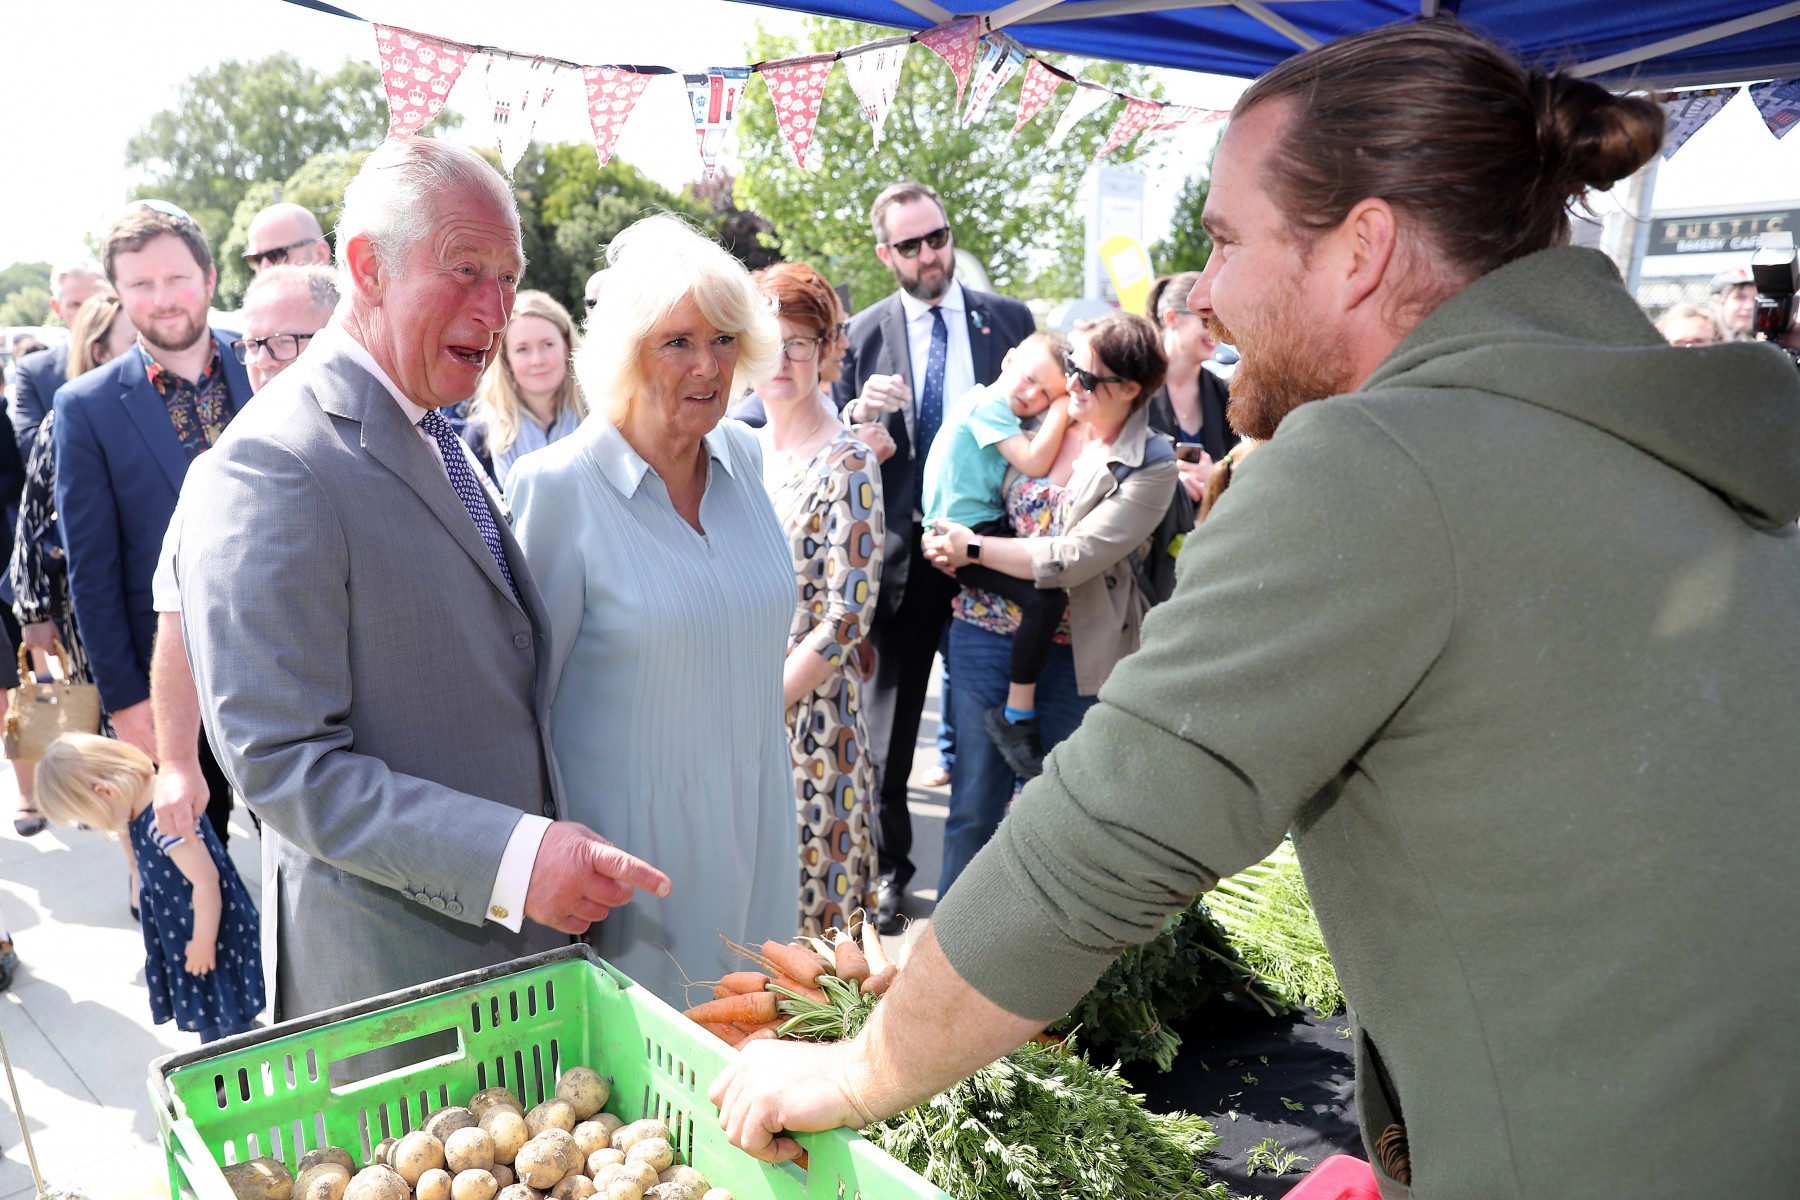 Prince Charles and Camilla visited the Lincoln Farmers and Craft Market in Christchurch